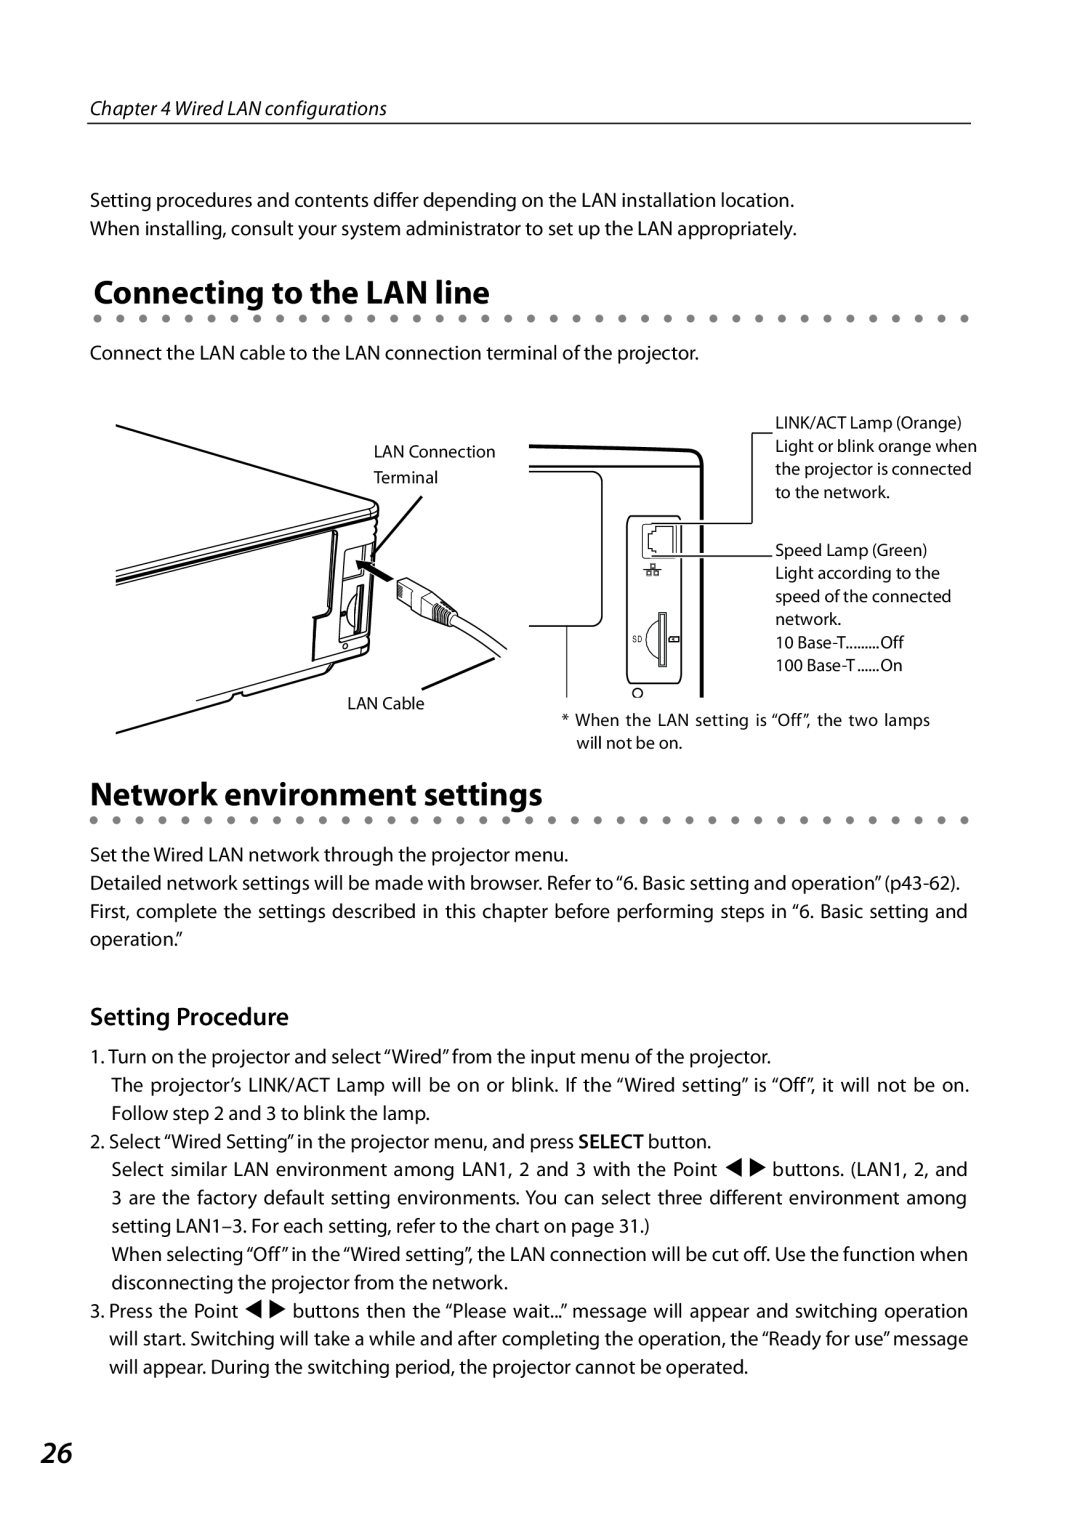 Sanyo SO-WIN-KF3AC Connecting to the LAN line, Network environment settings, Setting Procedure, Wired LAN configurations 